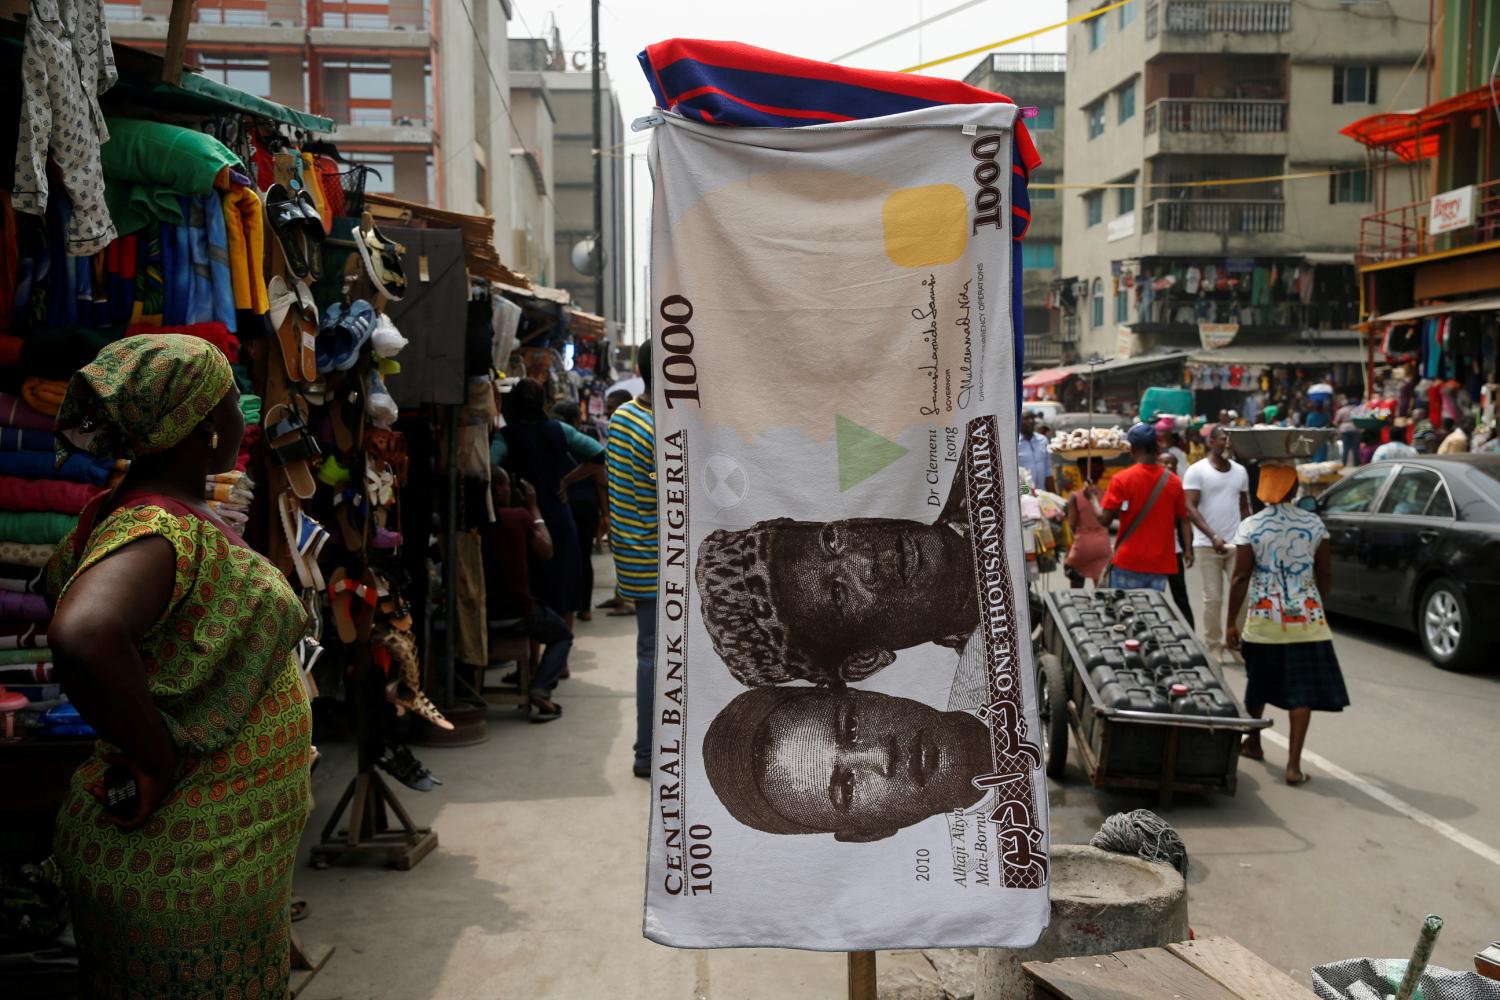 FILE PHOTO: A towel with a print of the Nigerian naira is displayed for sale at a street market in the central business district in Nigeria's commercial capital Lagos February 4, 2016. REUTERS/Akintunde Akinleye/File Photo - RC17DB8707D0